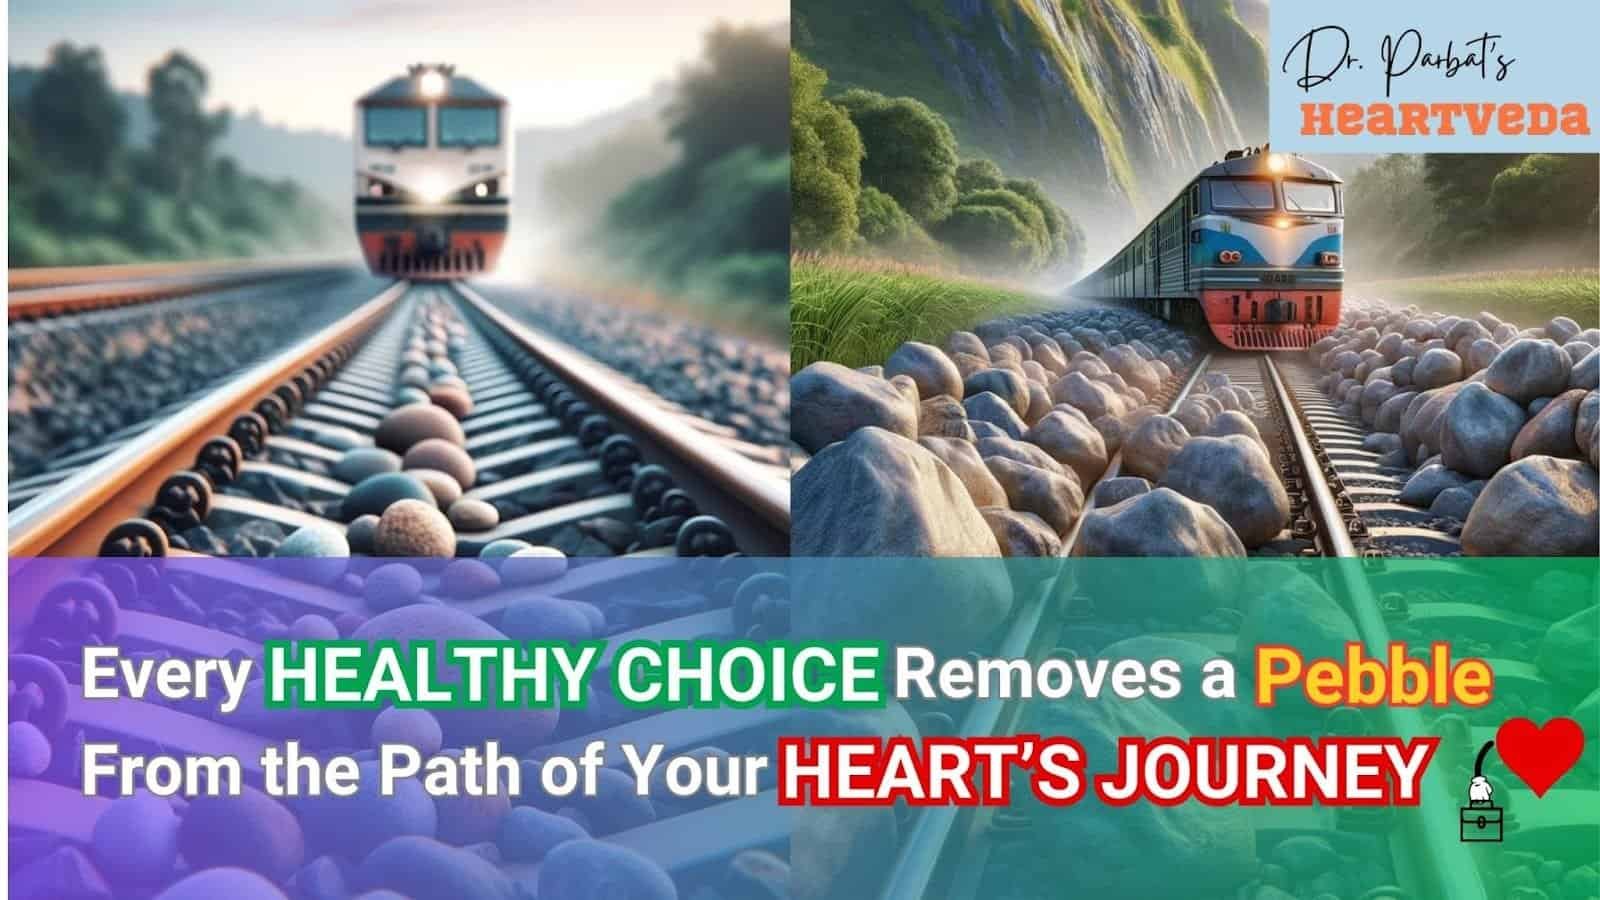 Banner Image: Every HEALTHY CHOICE Removes a Pebble From the Path of Your Heart's Journey - Dr. Biprajit Parbat - HEARTVEDA